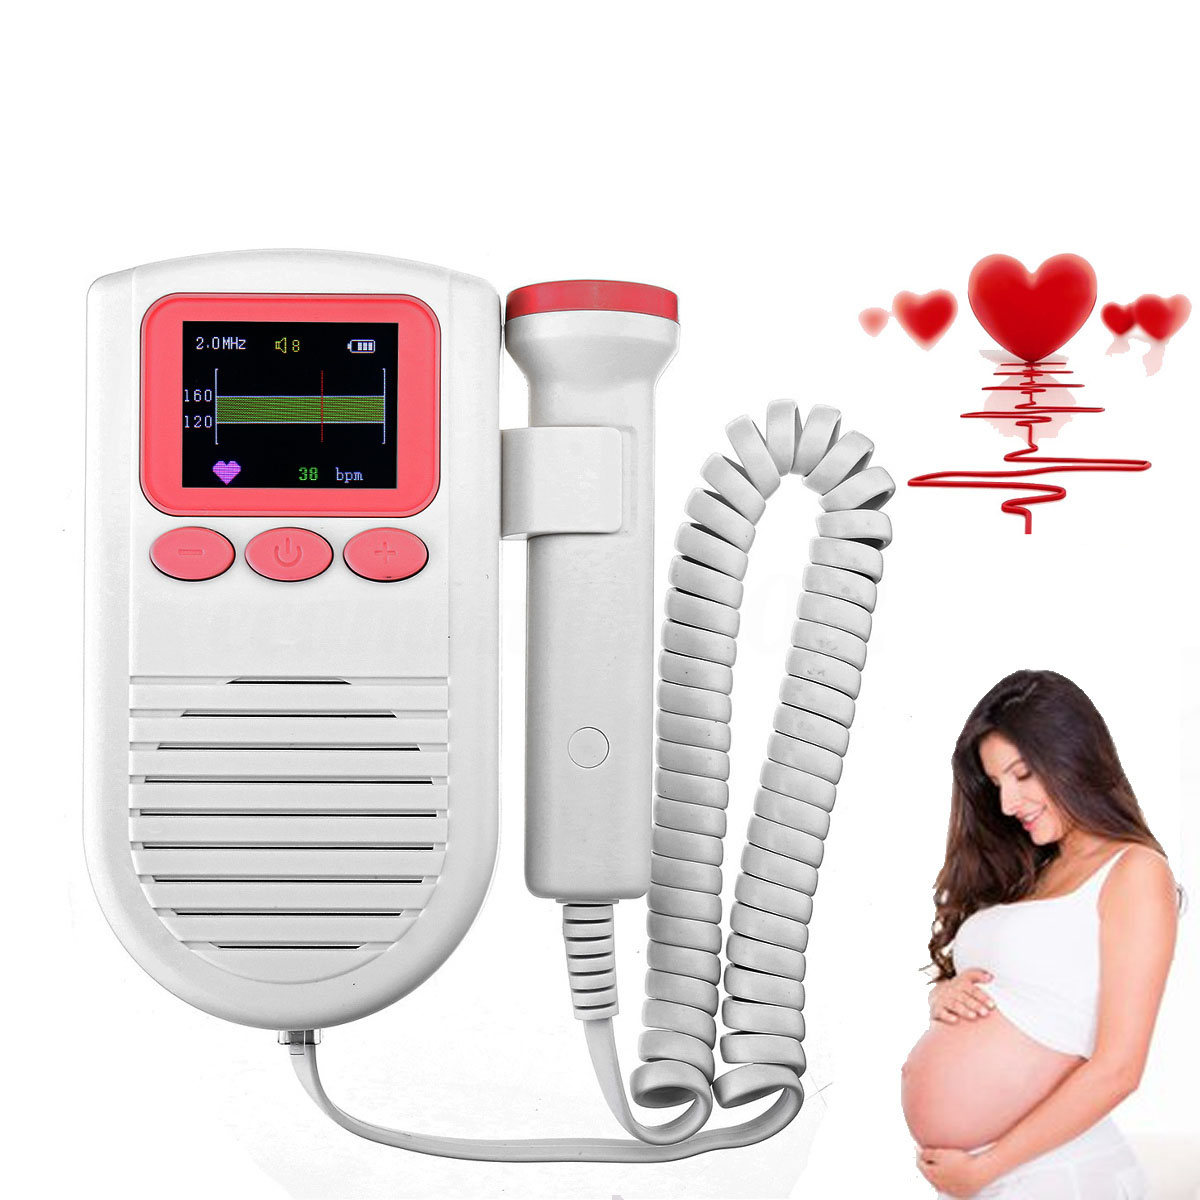 

LCD Baby Fetal Doppler Heart Monitor Portable Ultrasound Fetal Heart Monitor with 2MHz Probe Alarm Function FHR Curve Display Heartbeat Detector Battery Powered